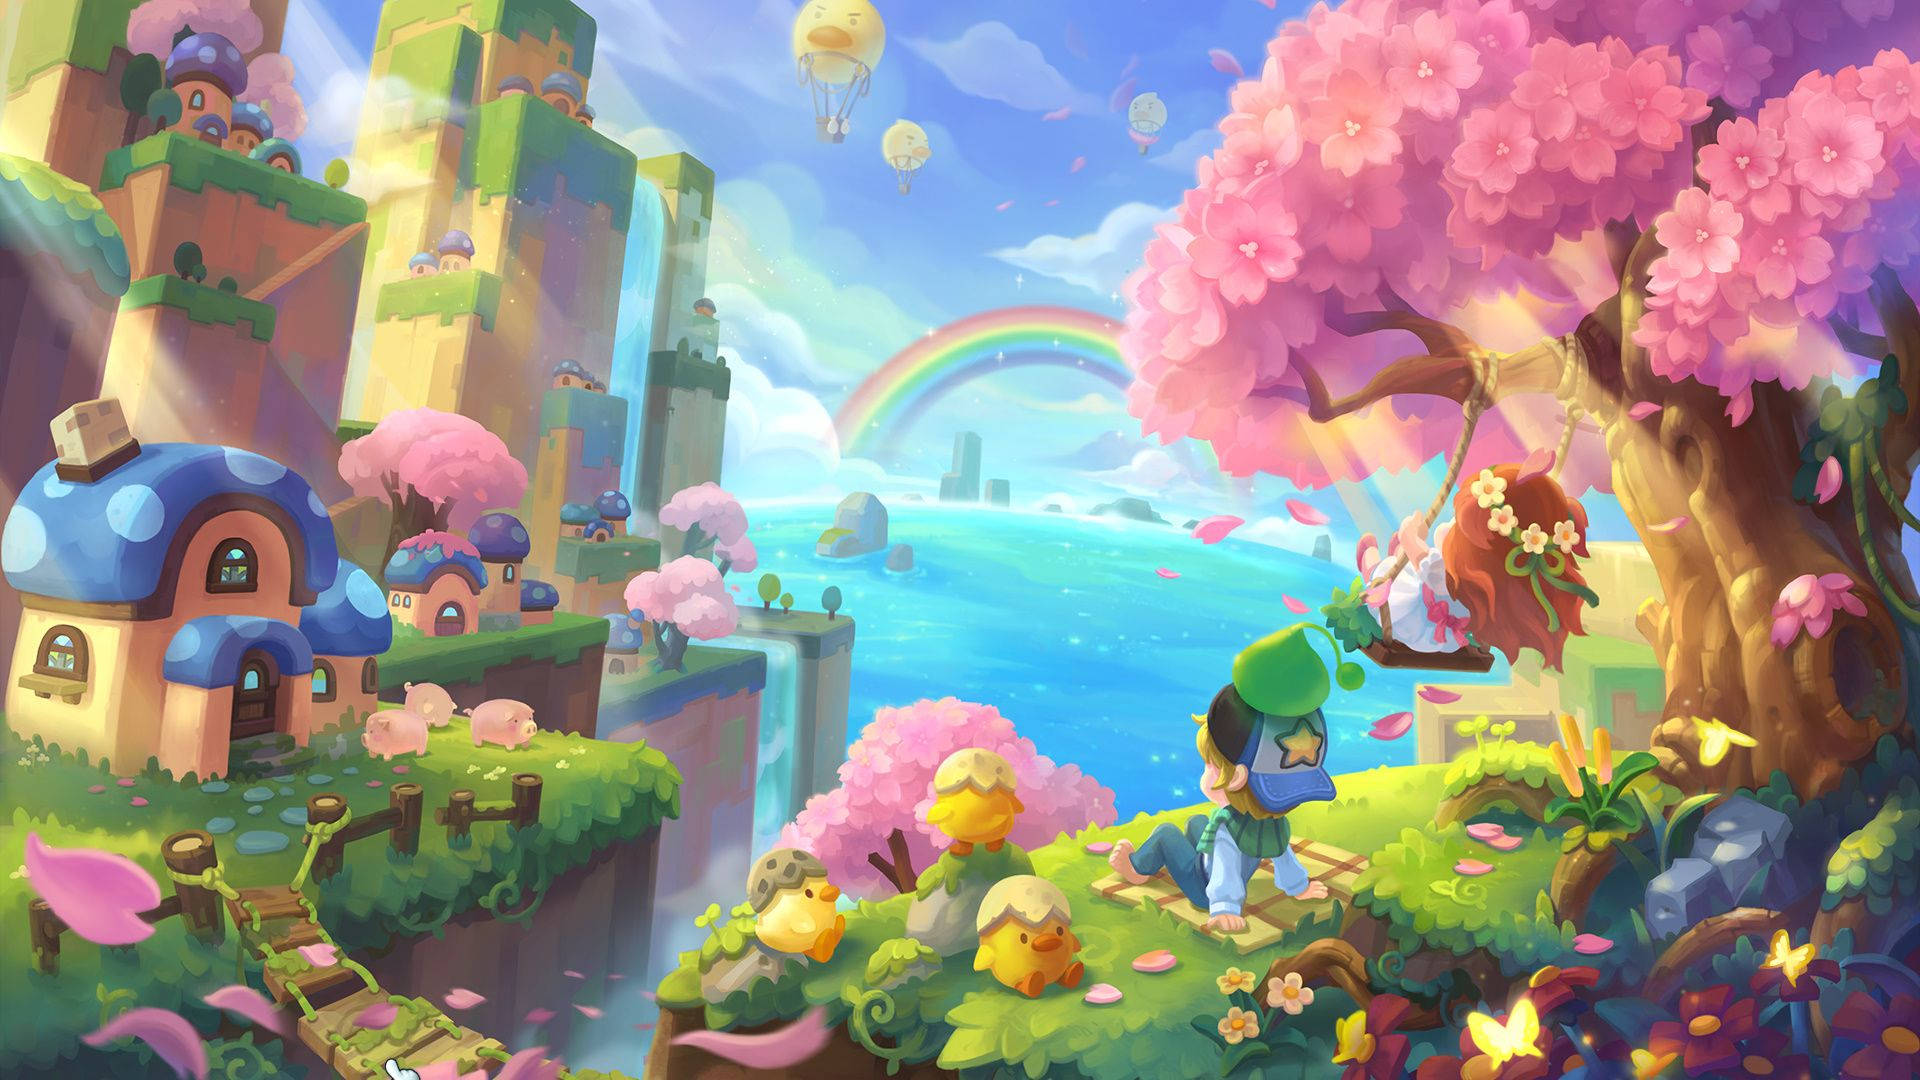 10 MapleStory 2 HD Wallpapers and Backgrounds